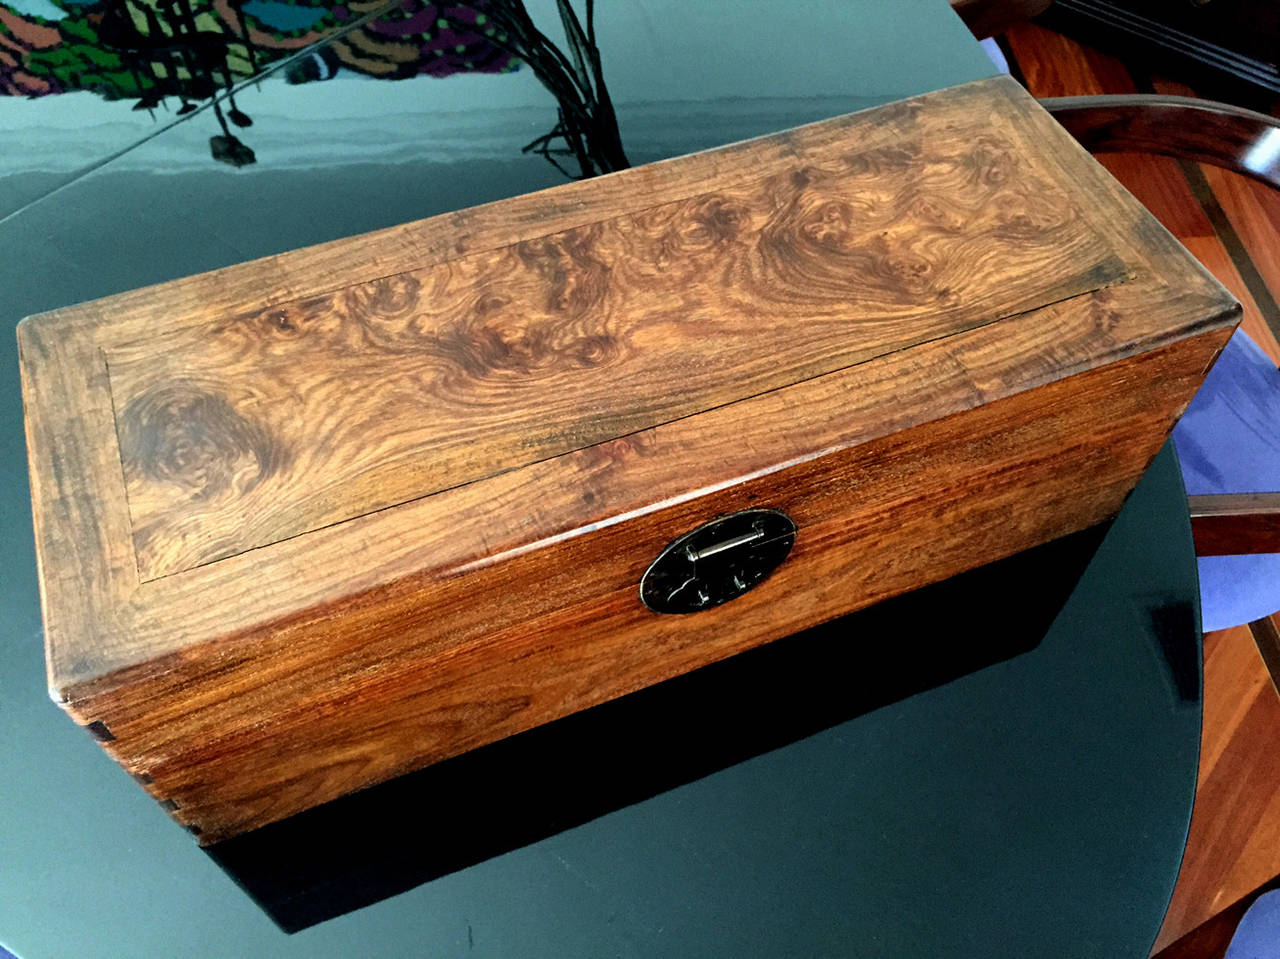 On offer is a Chinese antique document box with lid circa late 19th century. It is made from solid Huanghuali, the most sought-after exotic hardwood in Chinese furniture making, and brass hardware. Gracefully proportioned, the box features wonderful